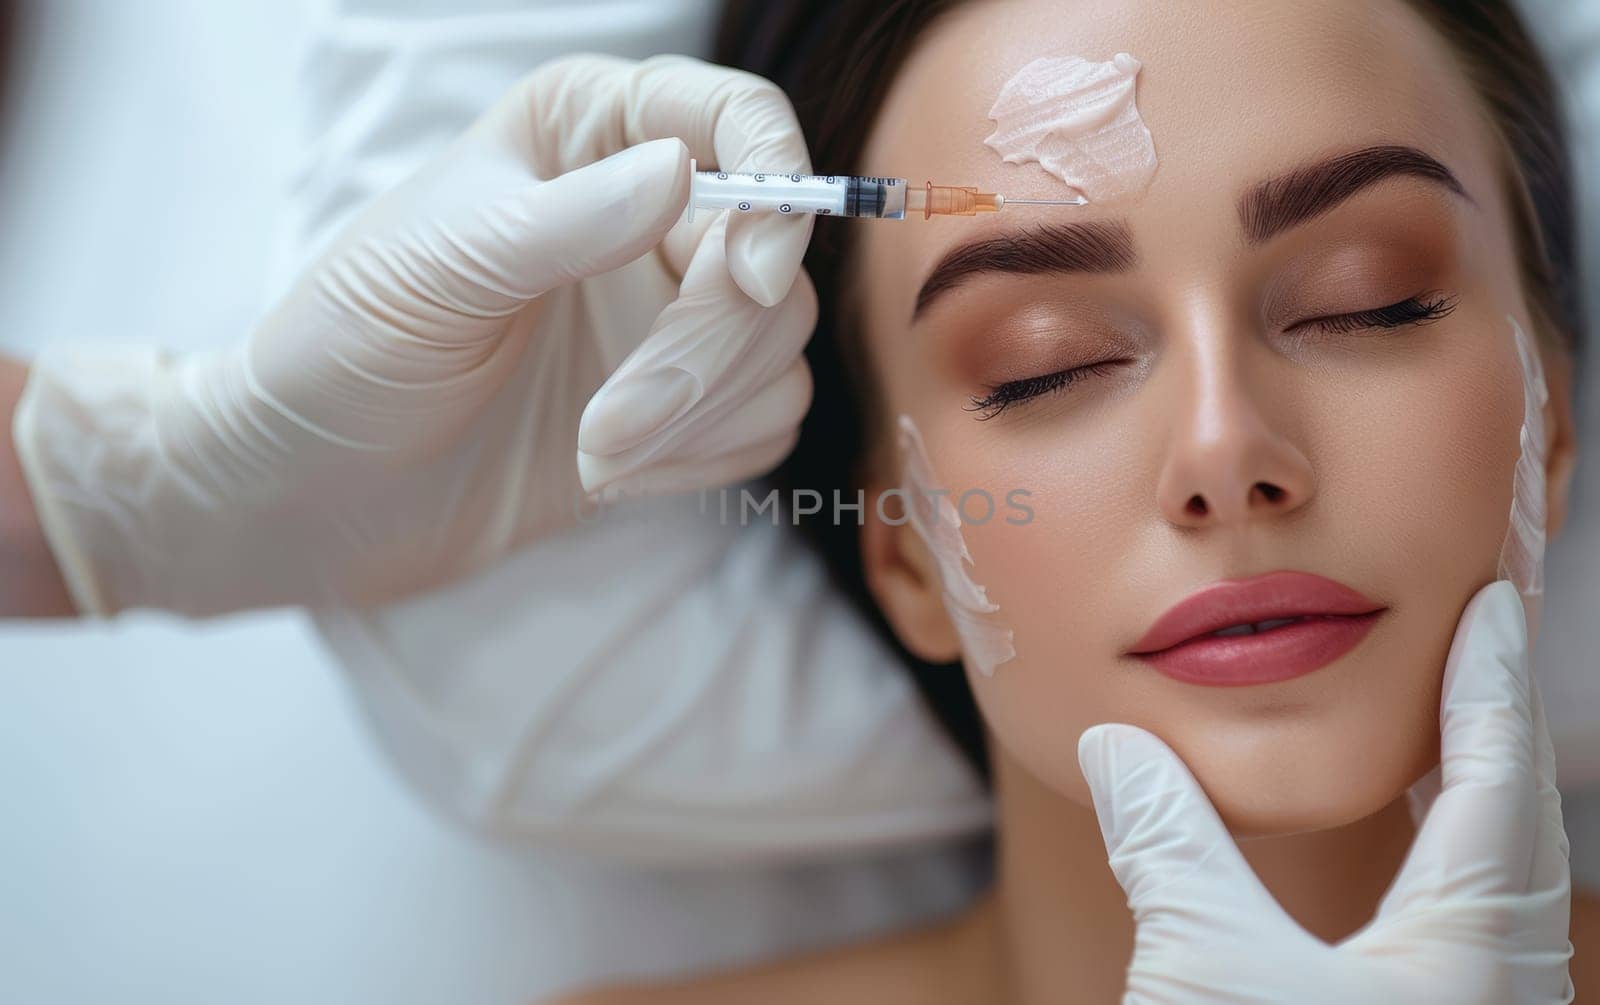 A tranquil woman undergoes a facial treatment, where cream is applied with a syringe, blending medical precision with skincare luxury. The image suggests a harmonious balance of health and beauty. by sfinks